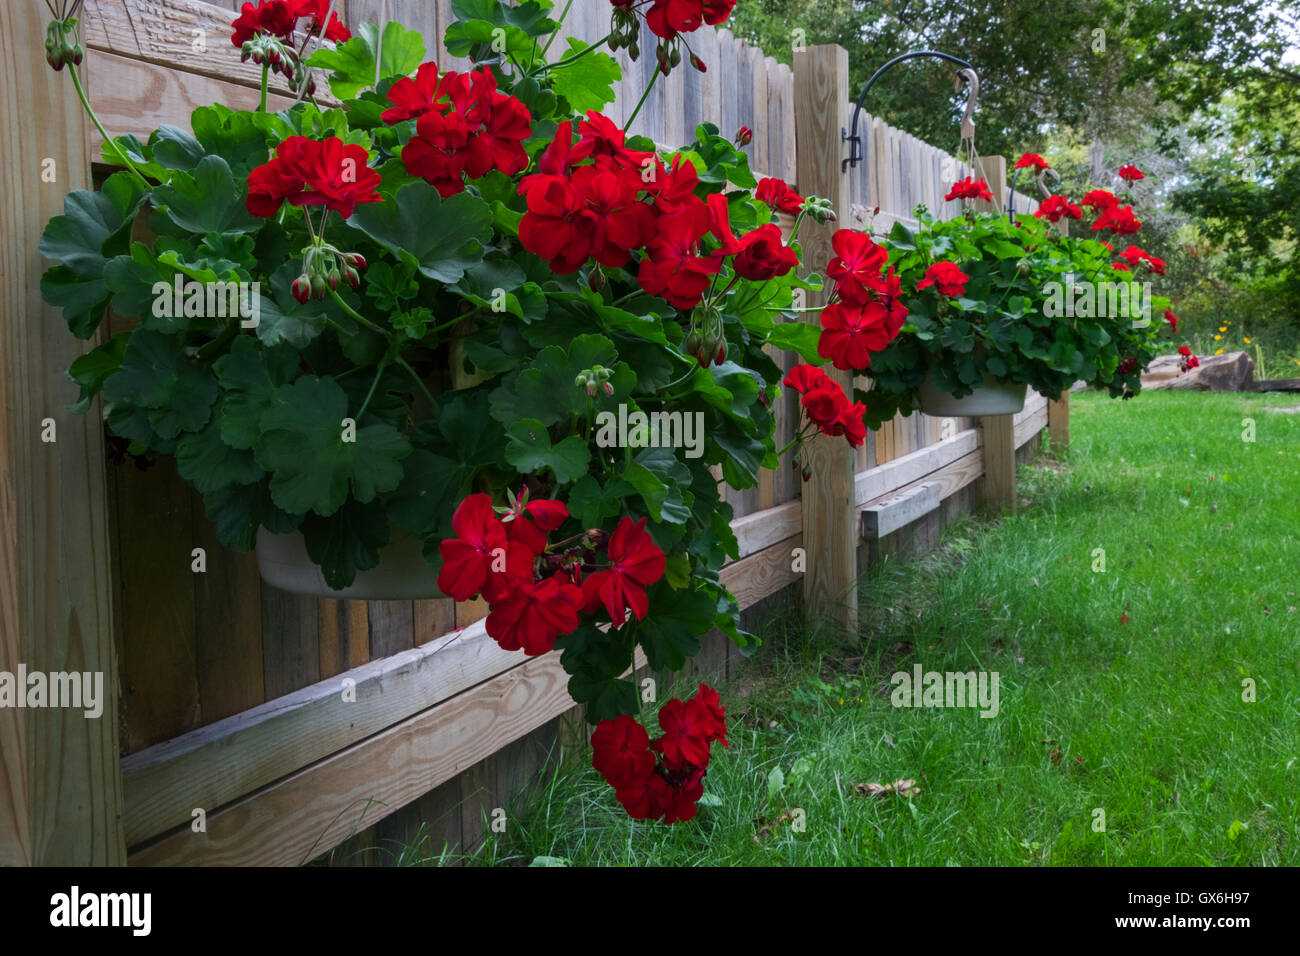 Potted Geraniums hanging on a wooden fence Stock Photo